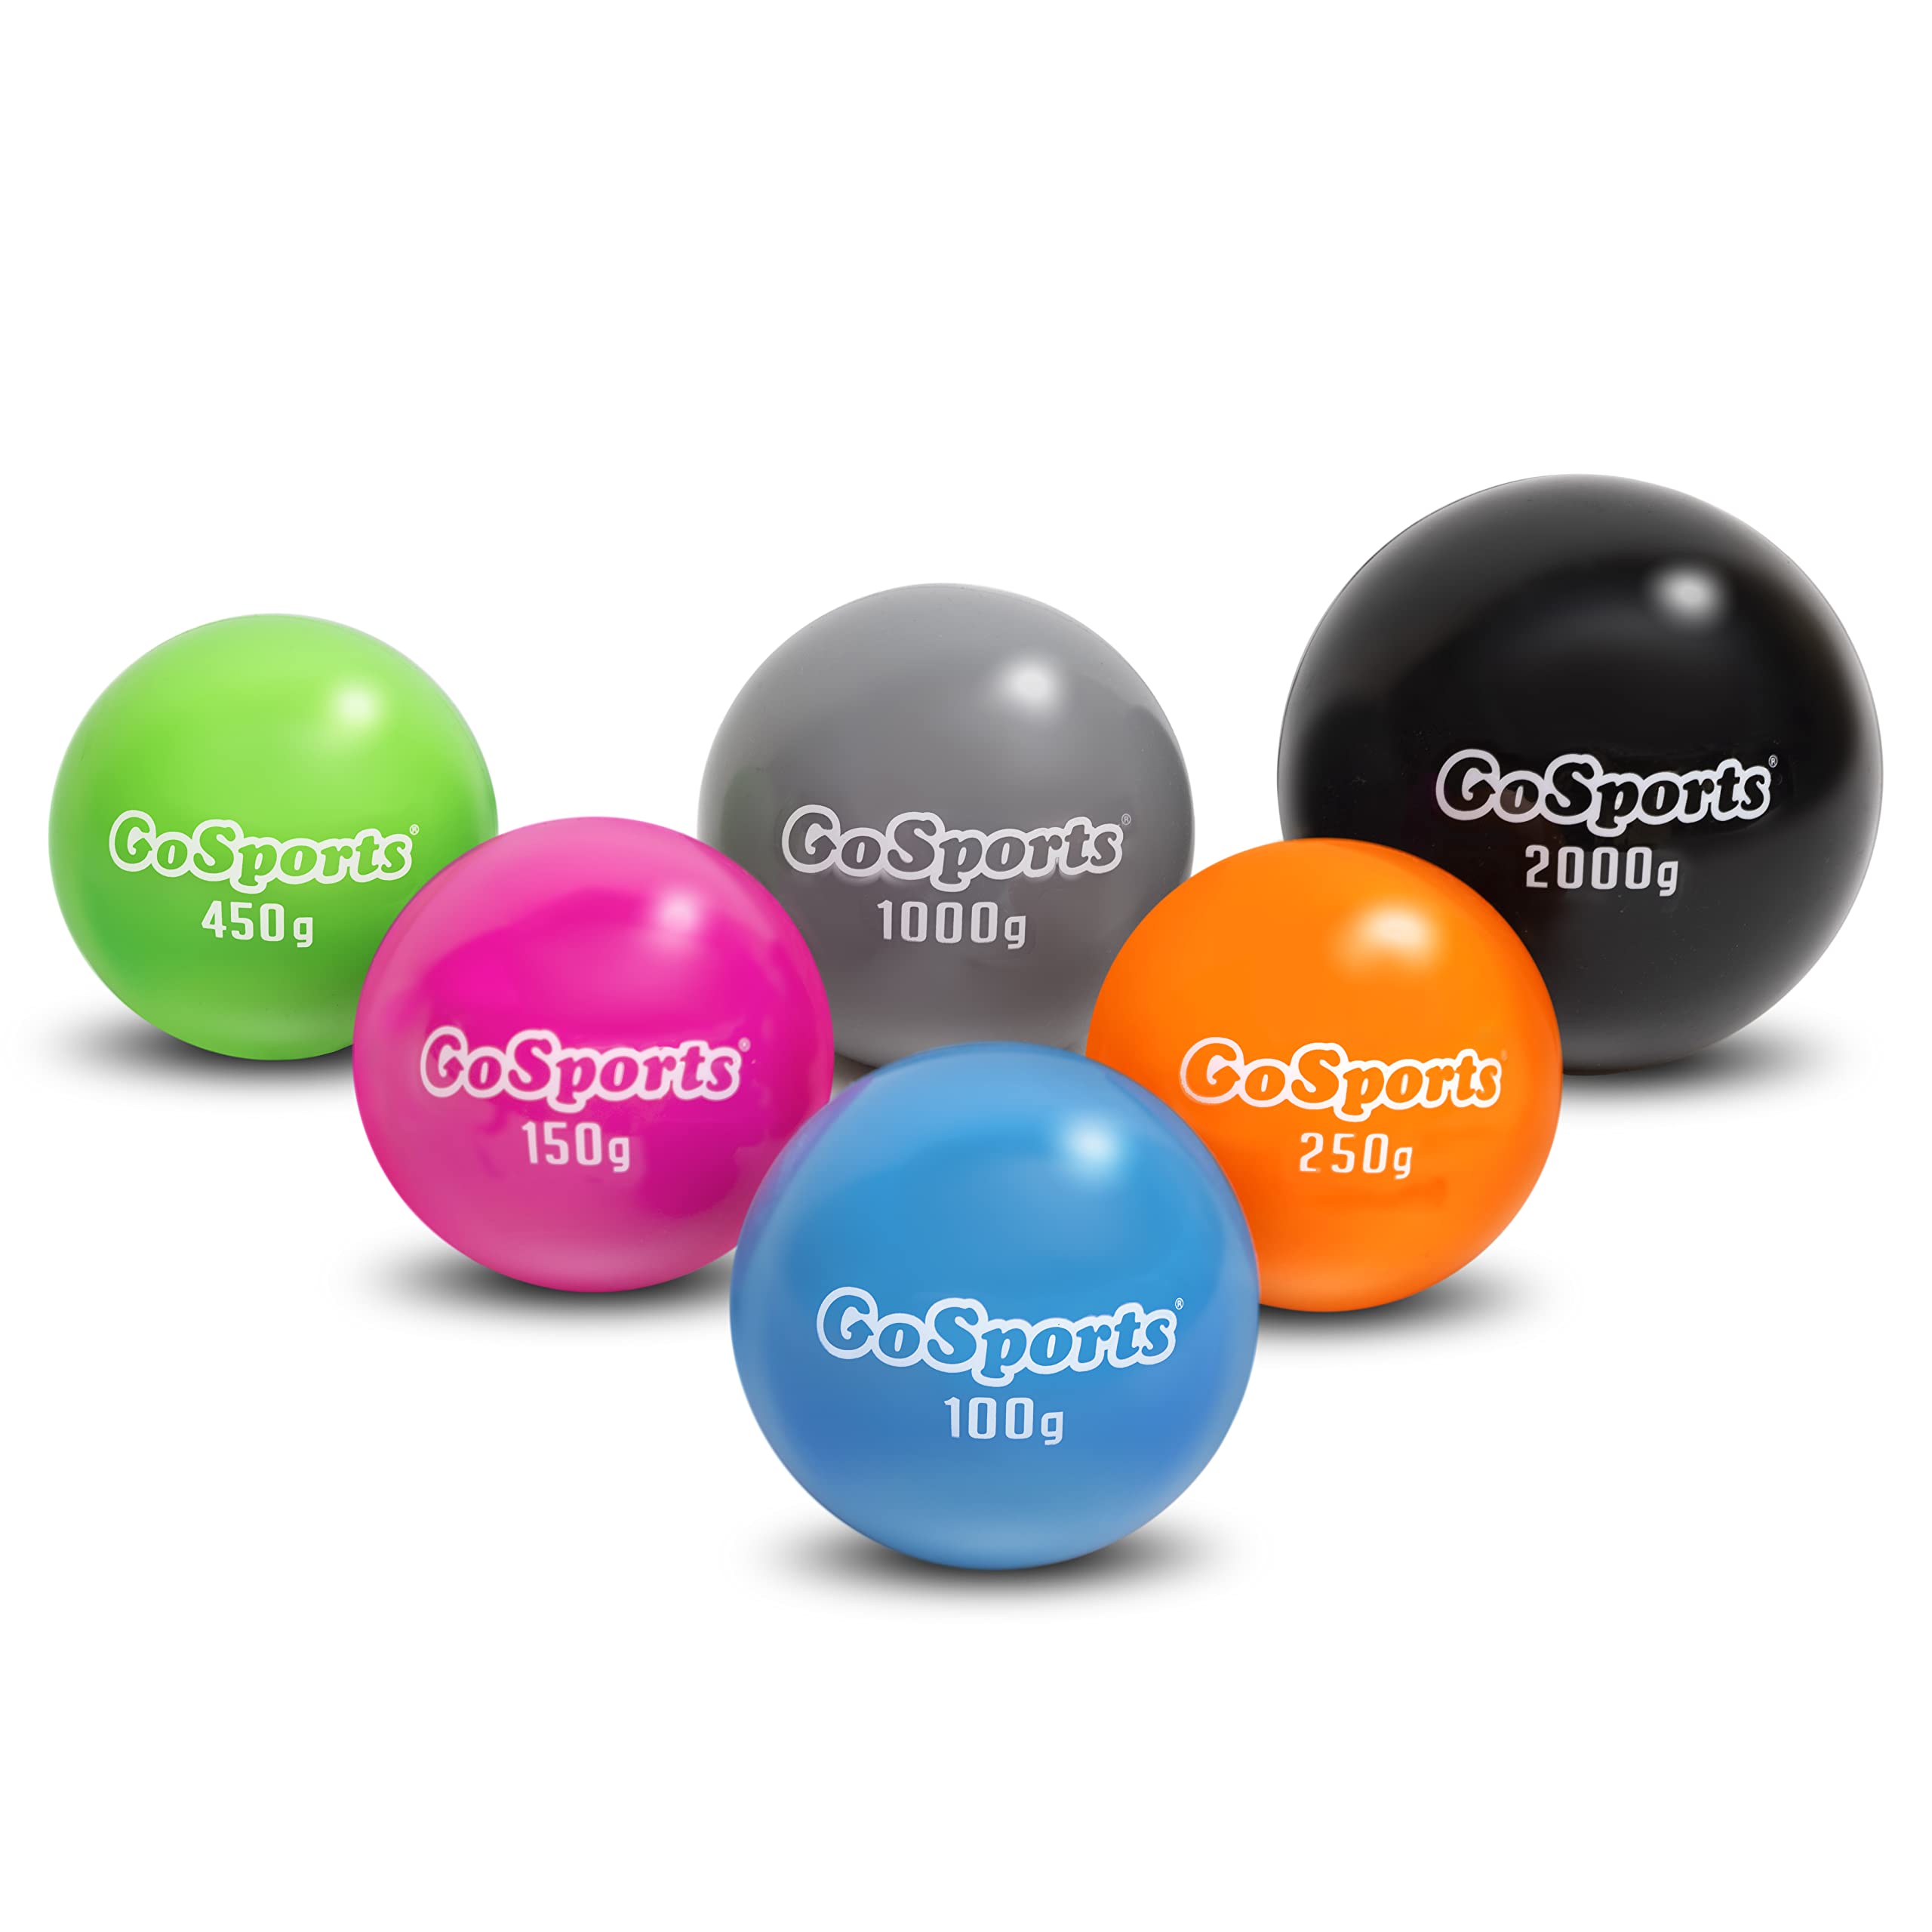 GoSports Plyometric Weighted Balls for Baseball & Softball Training 6 Pack - Variable Weight Balls to Improve Power and Mechanics - Choose Pro or Elite Set